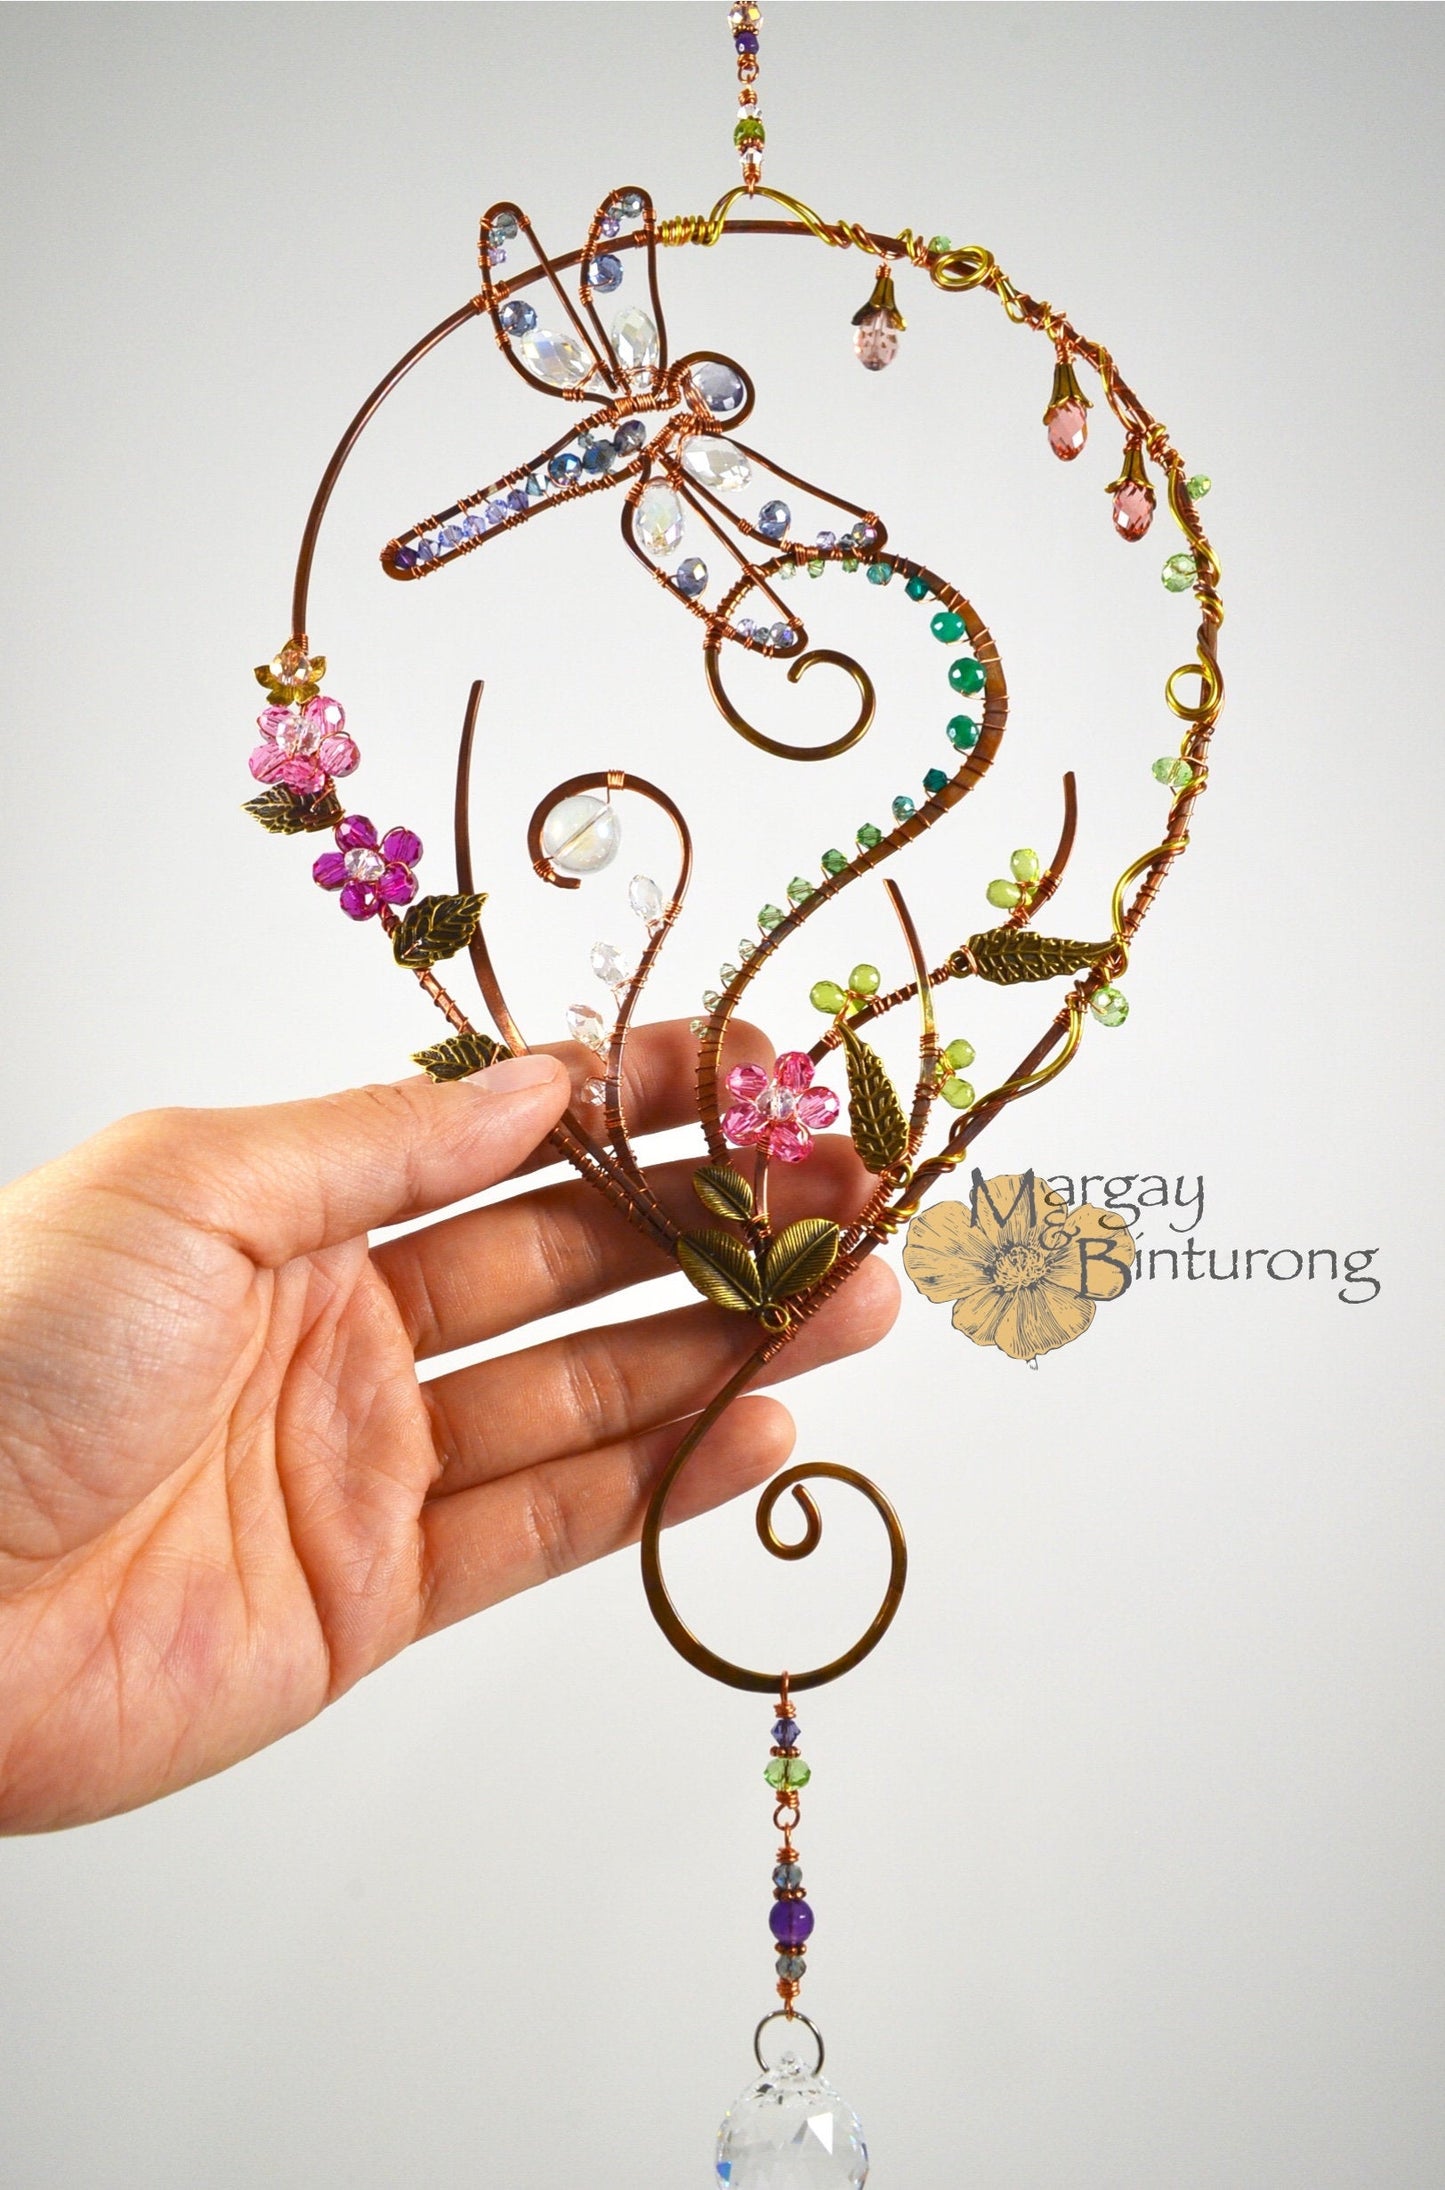 Garden Dragonfly Suncatcher Made From Wire and Crystal prisms